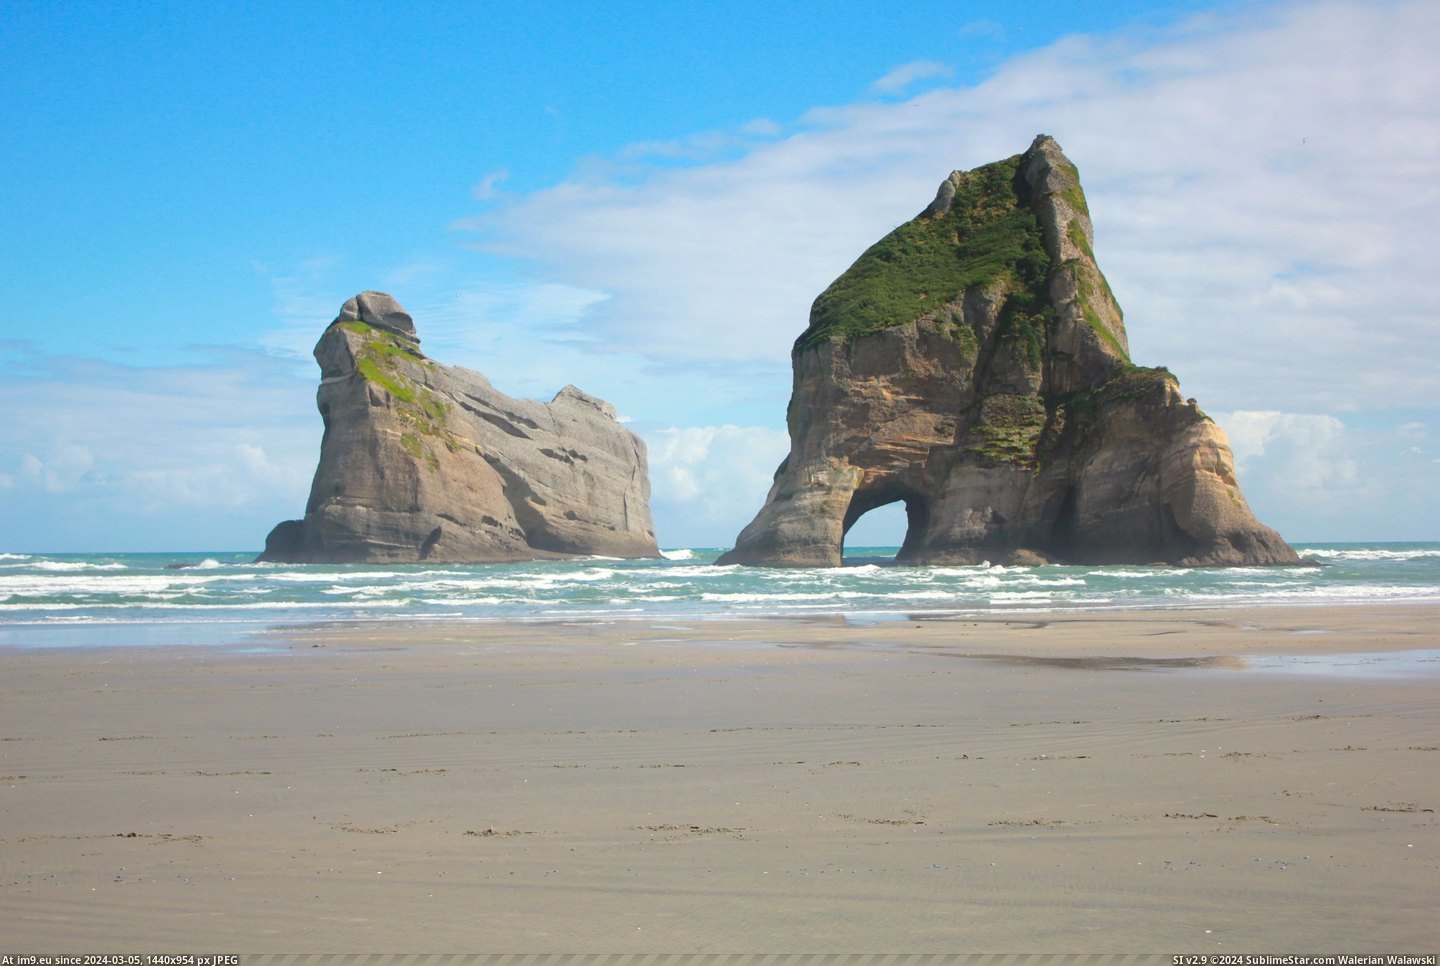 #Zealand #Islands #Puponga #3110x2073 #Archway [Earthporn] Puponga, Archway islands, New Zealand [3110x2073] Pic. (Image of album My r/EARTHPORN favs))